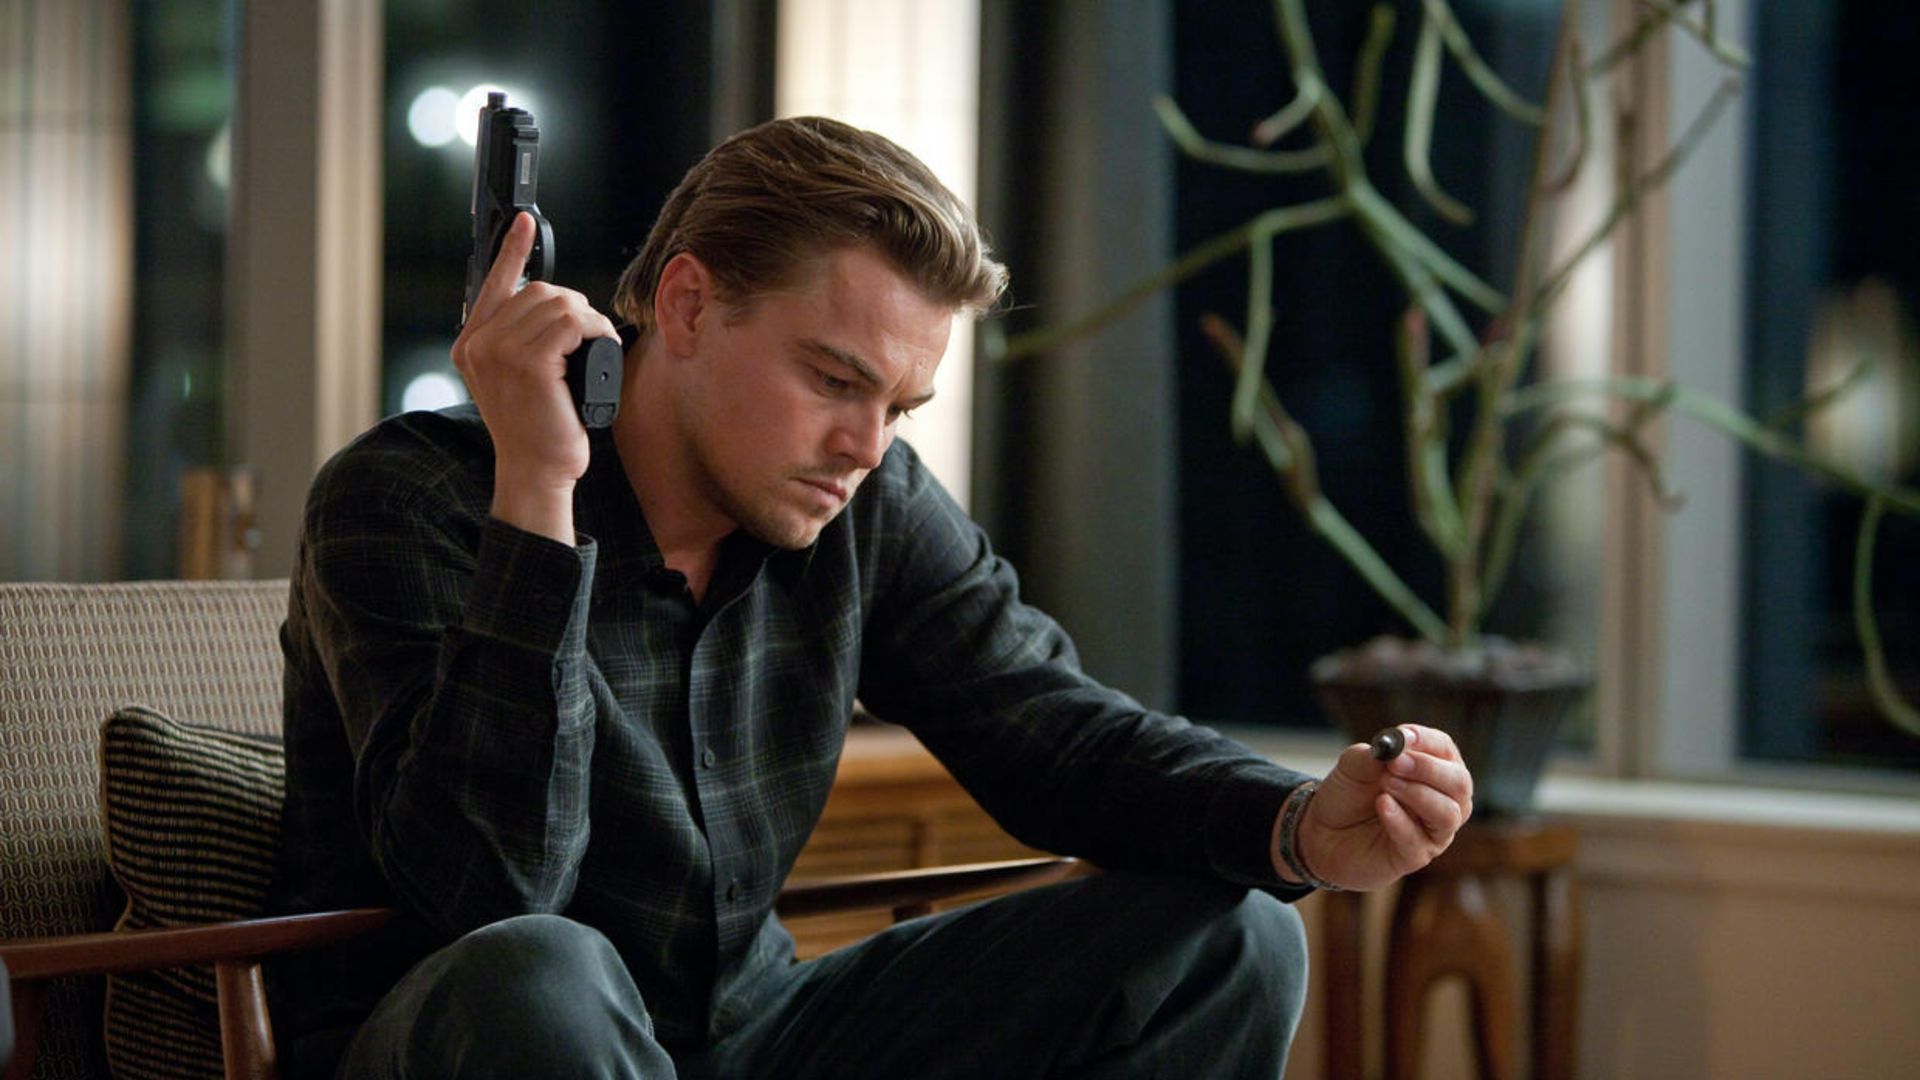 Leonardo DiCaprio still puzzled by the Inception ending: “I have no